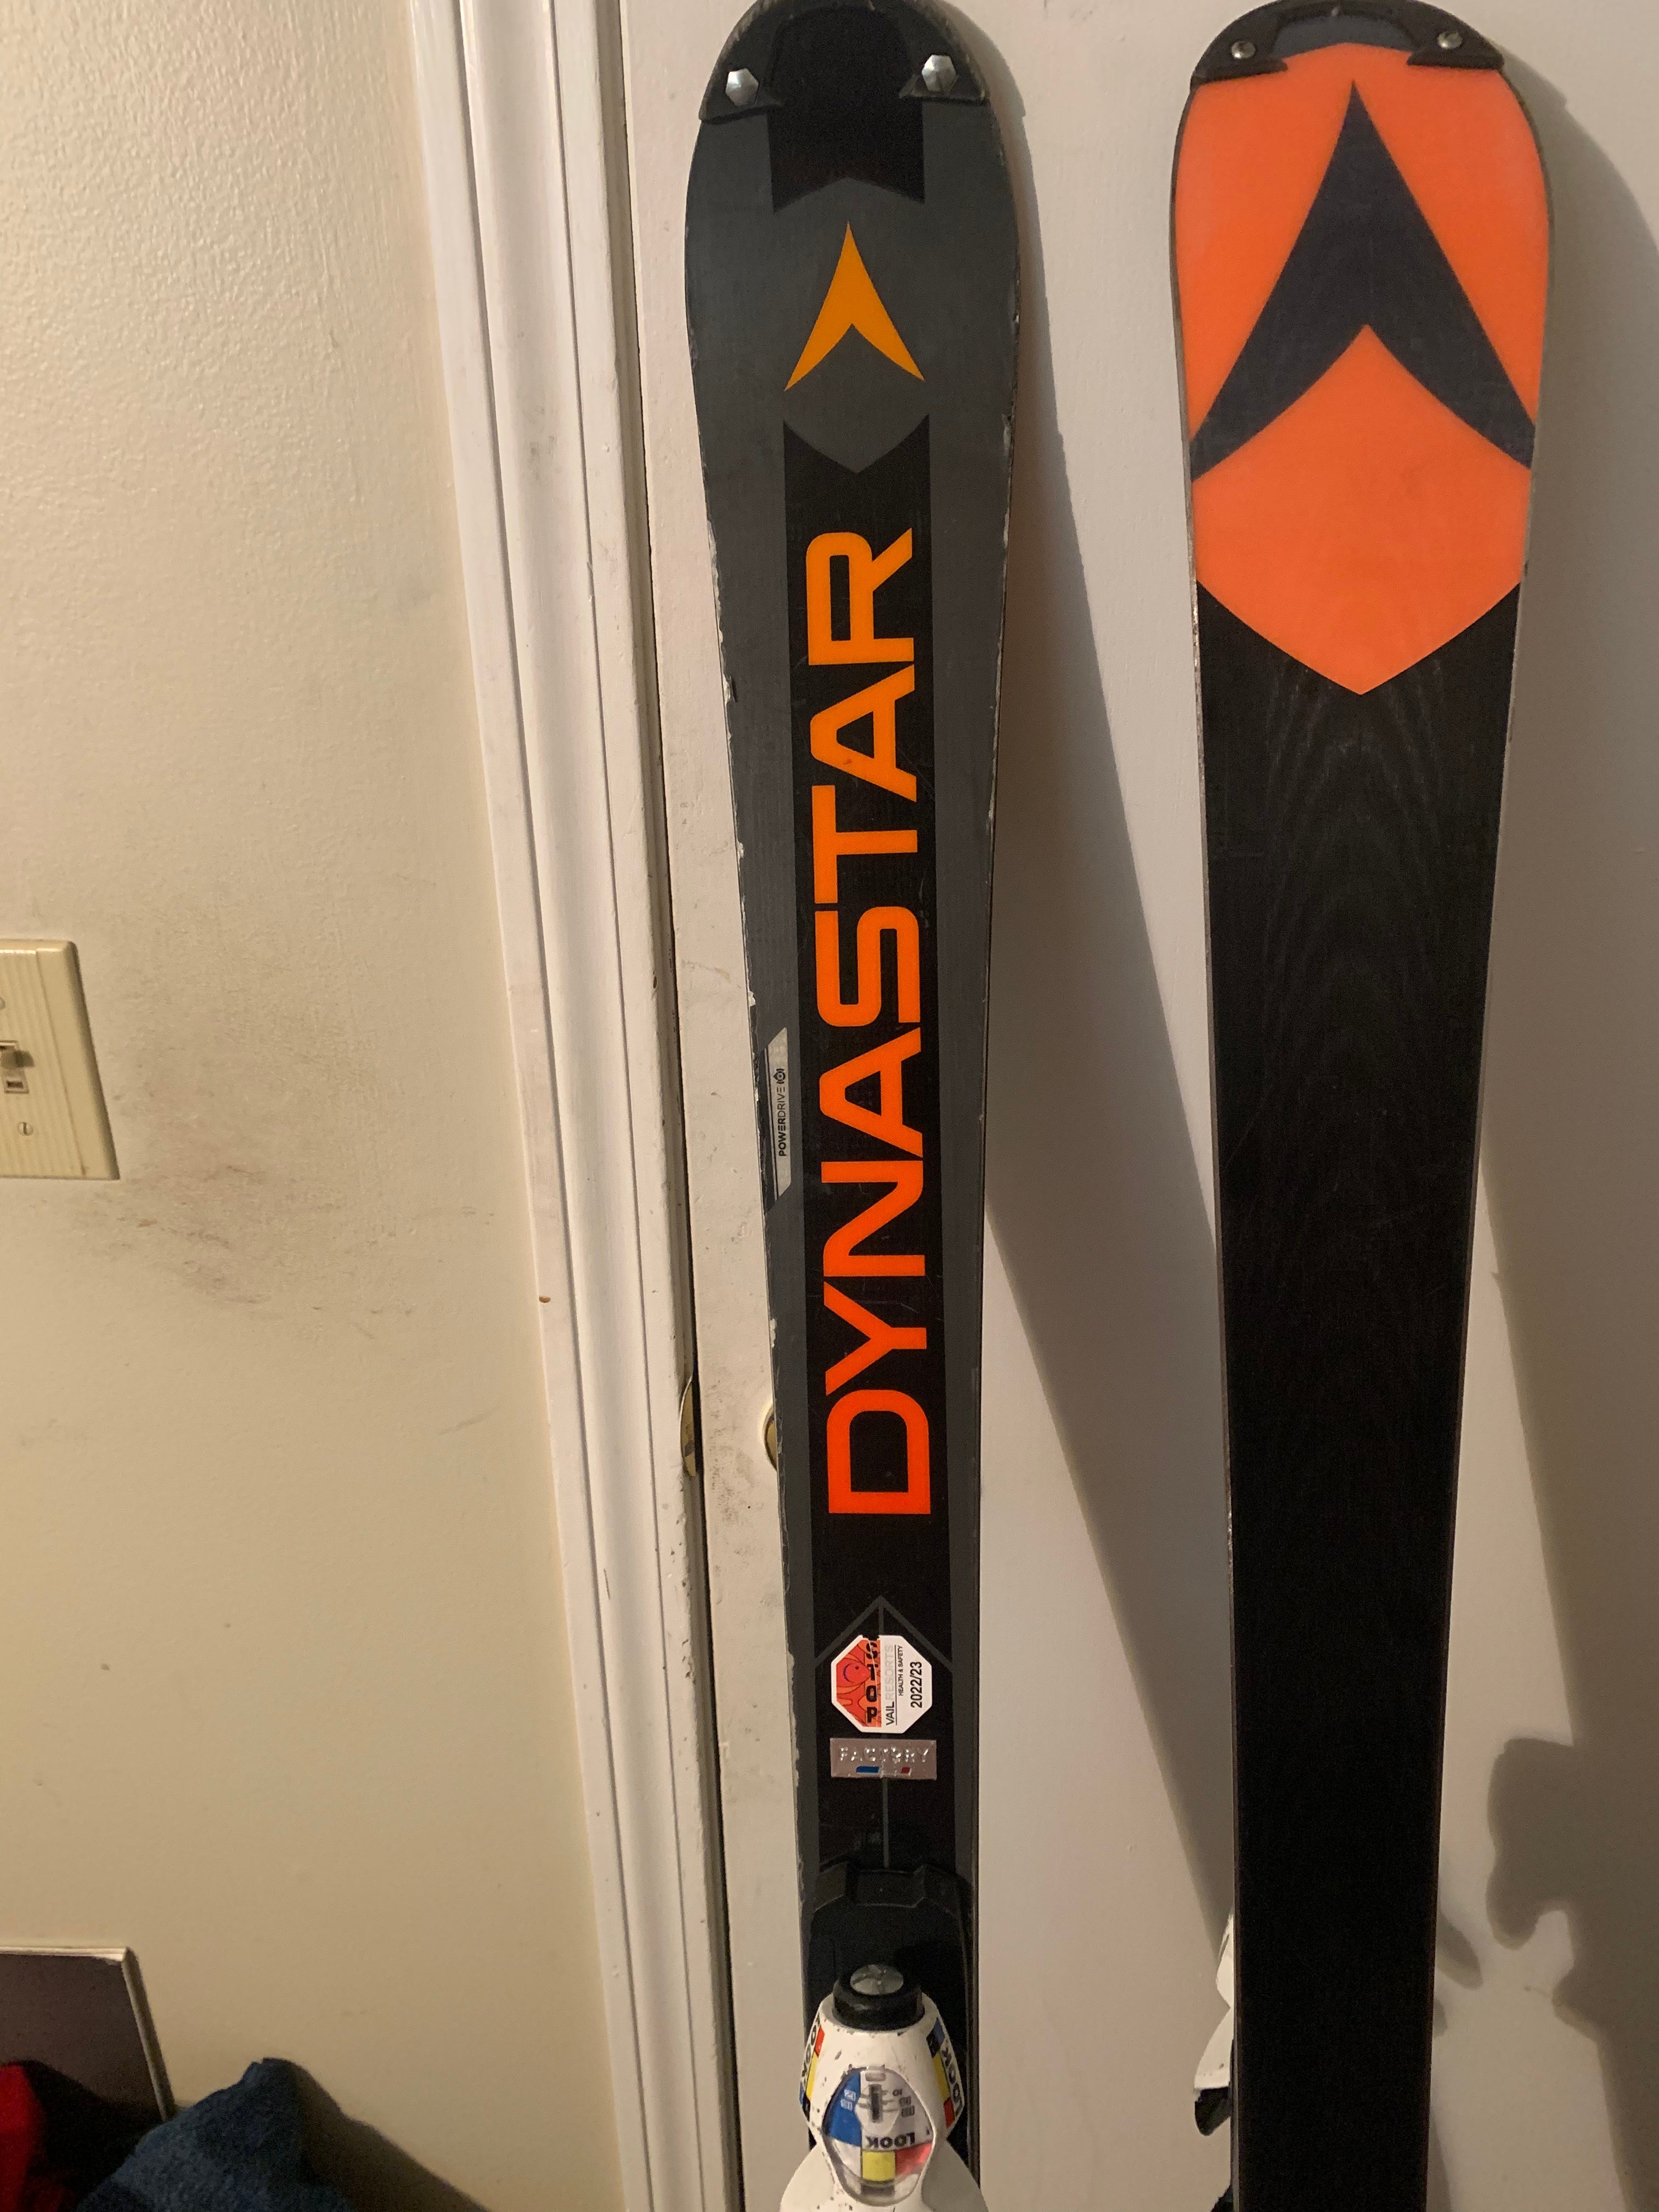 New Dynastar 165 cm Racing Speed WC FIS SL Skis With Bindings Max